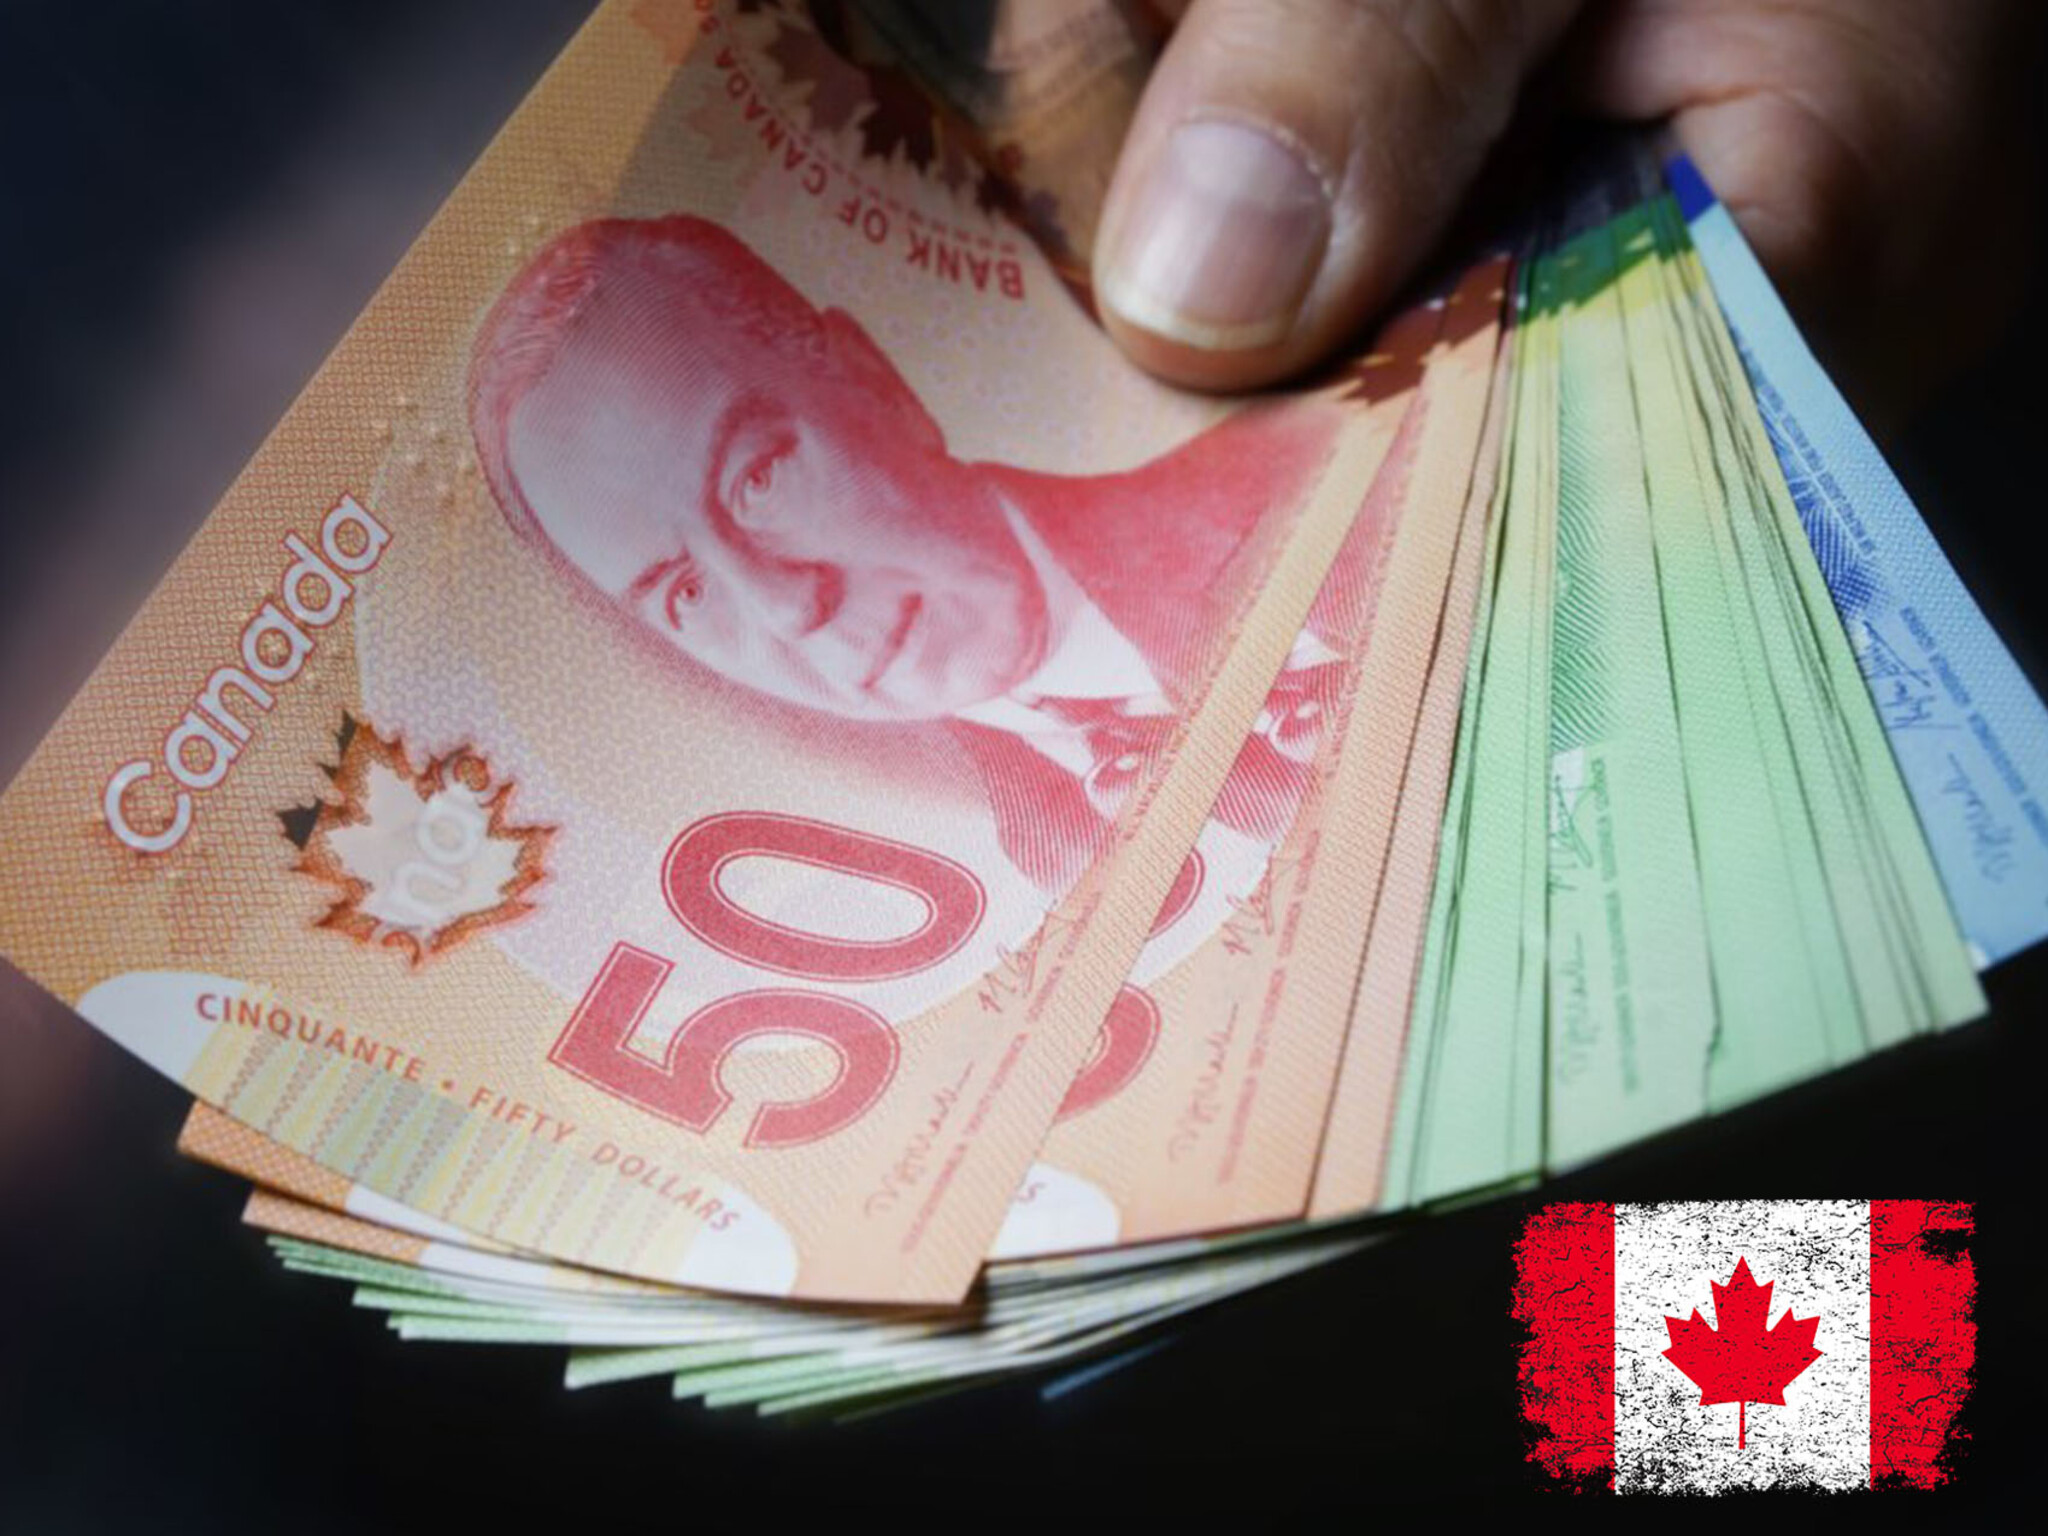 The minimum wage in Canada is scheduled to increase starting next month